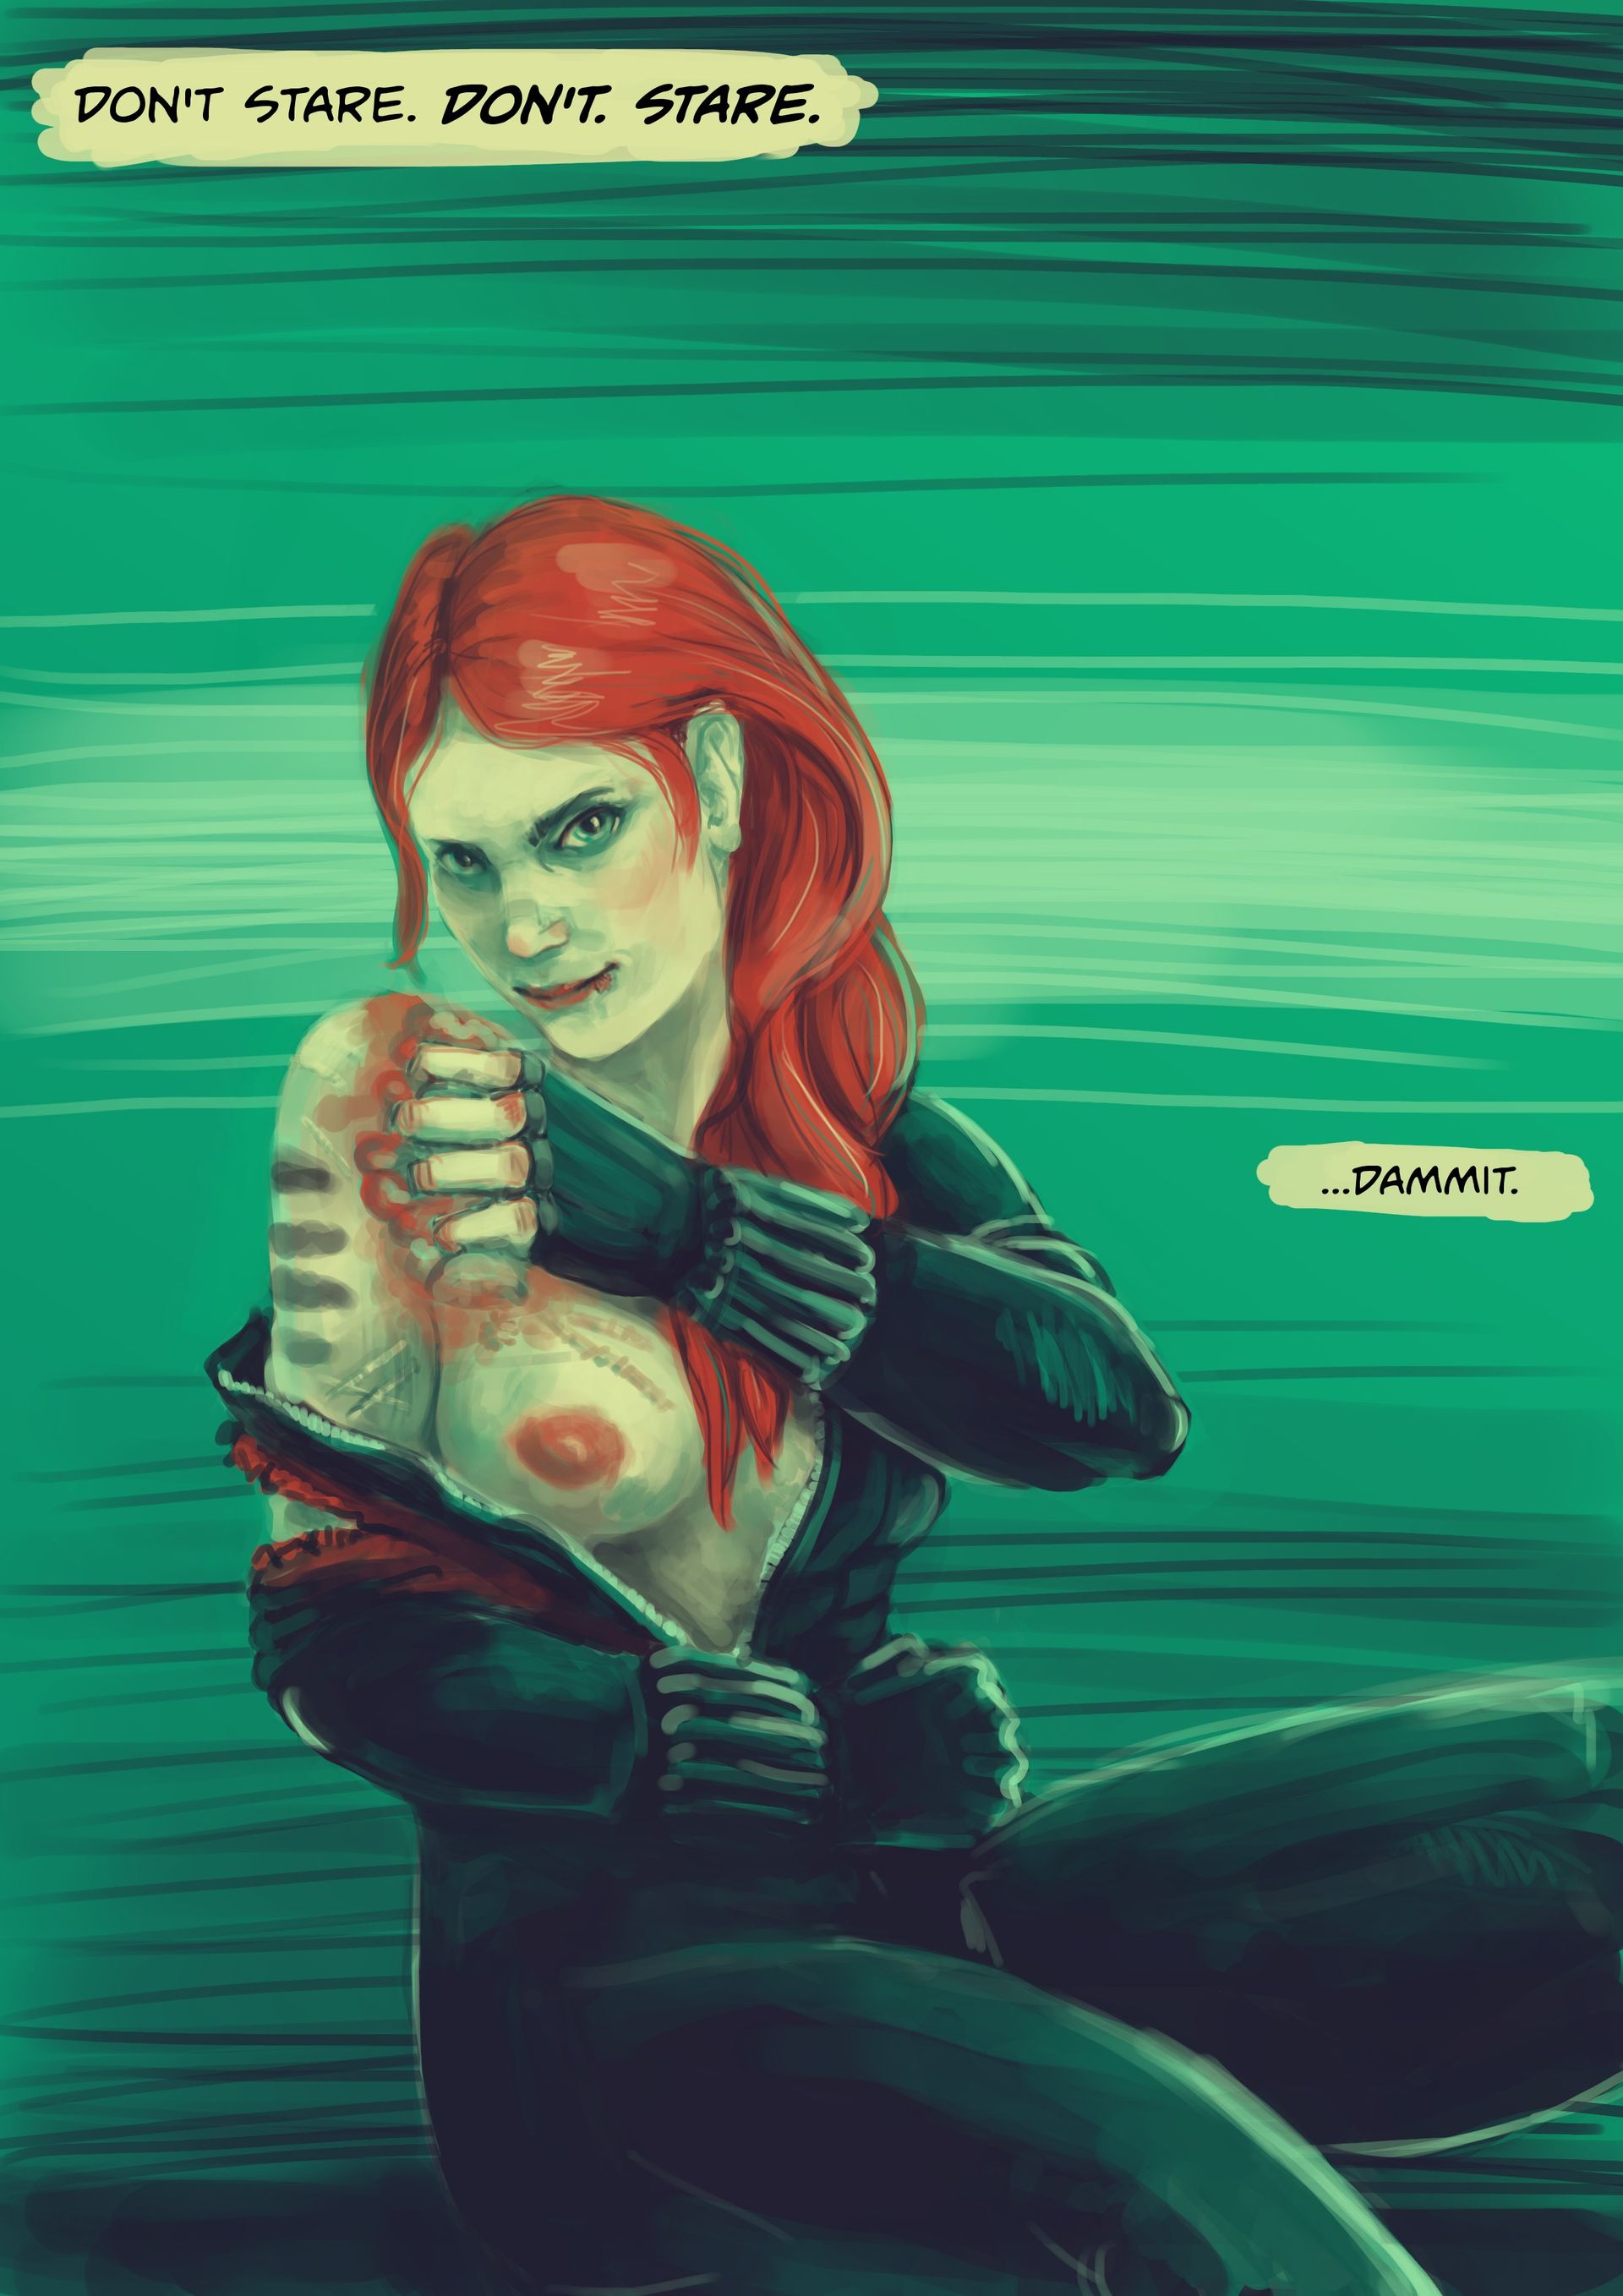 Digital painting in stylized colors of Natasha Romanoff. She's in a cat suit stripped to the waist as she cleans a shoulder wound. She's looking mockingly at the viewer. A narrator text says: "Don't stare. DON'T. STARE. ...dammit."
